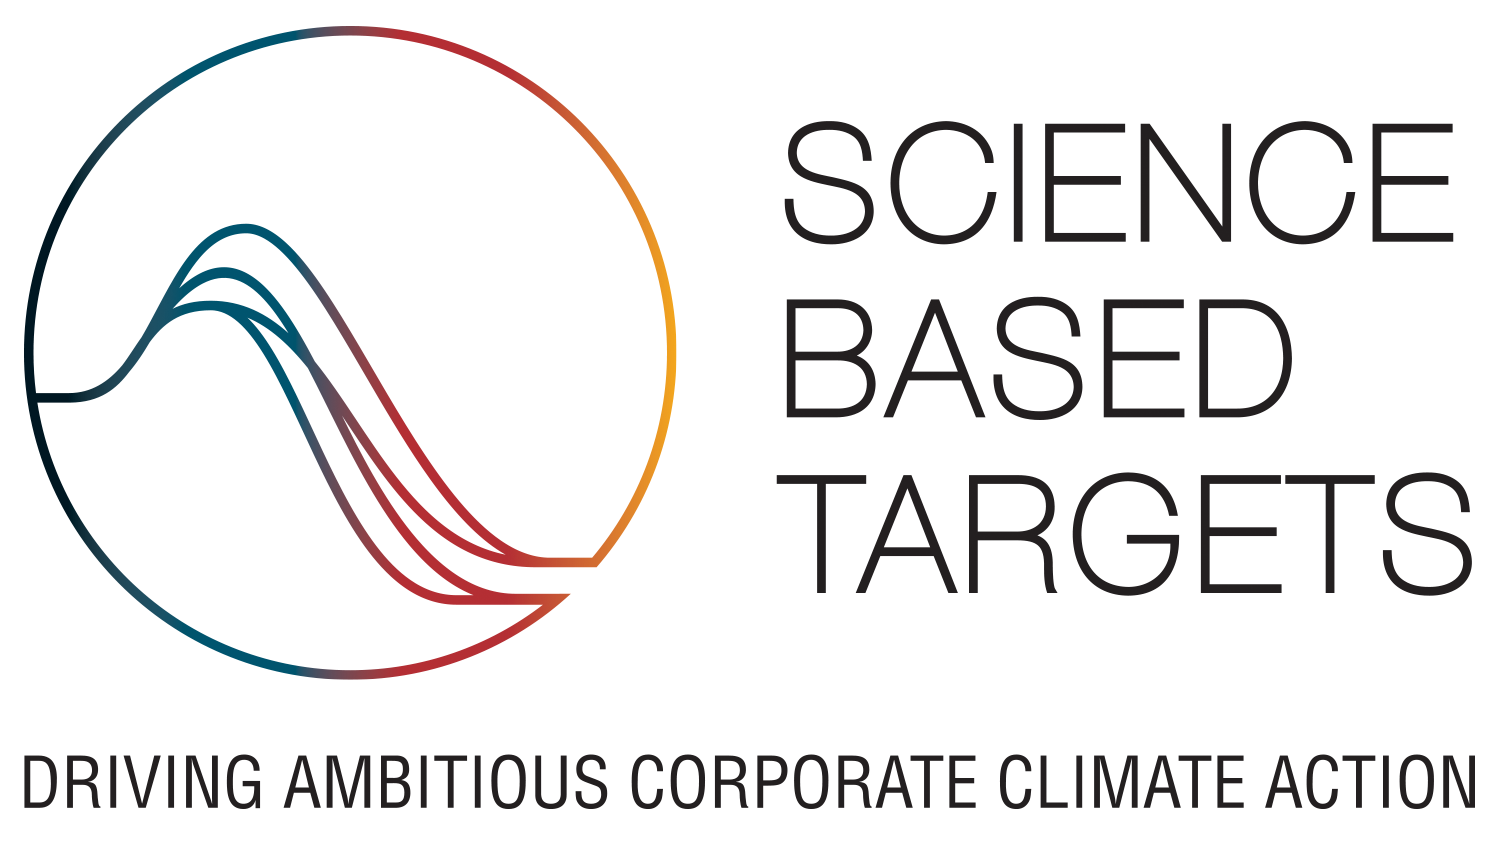 Science Based Targets: Ambitious corporate climate action